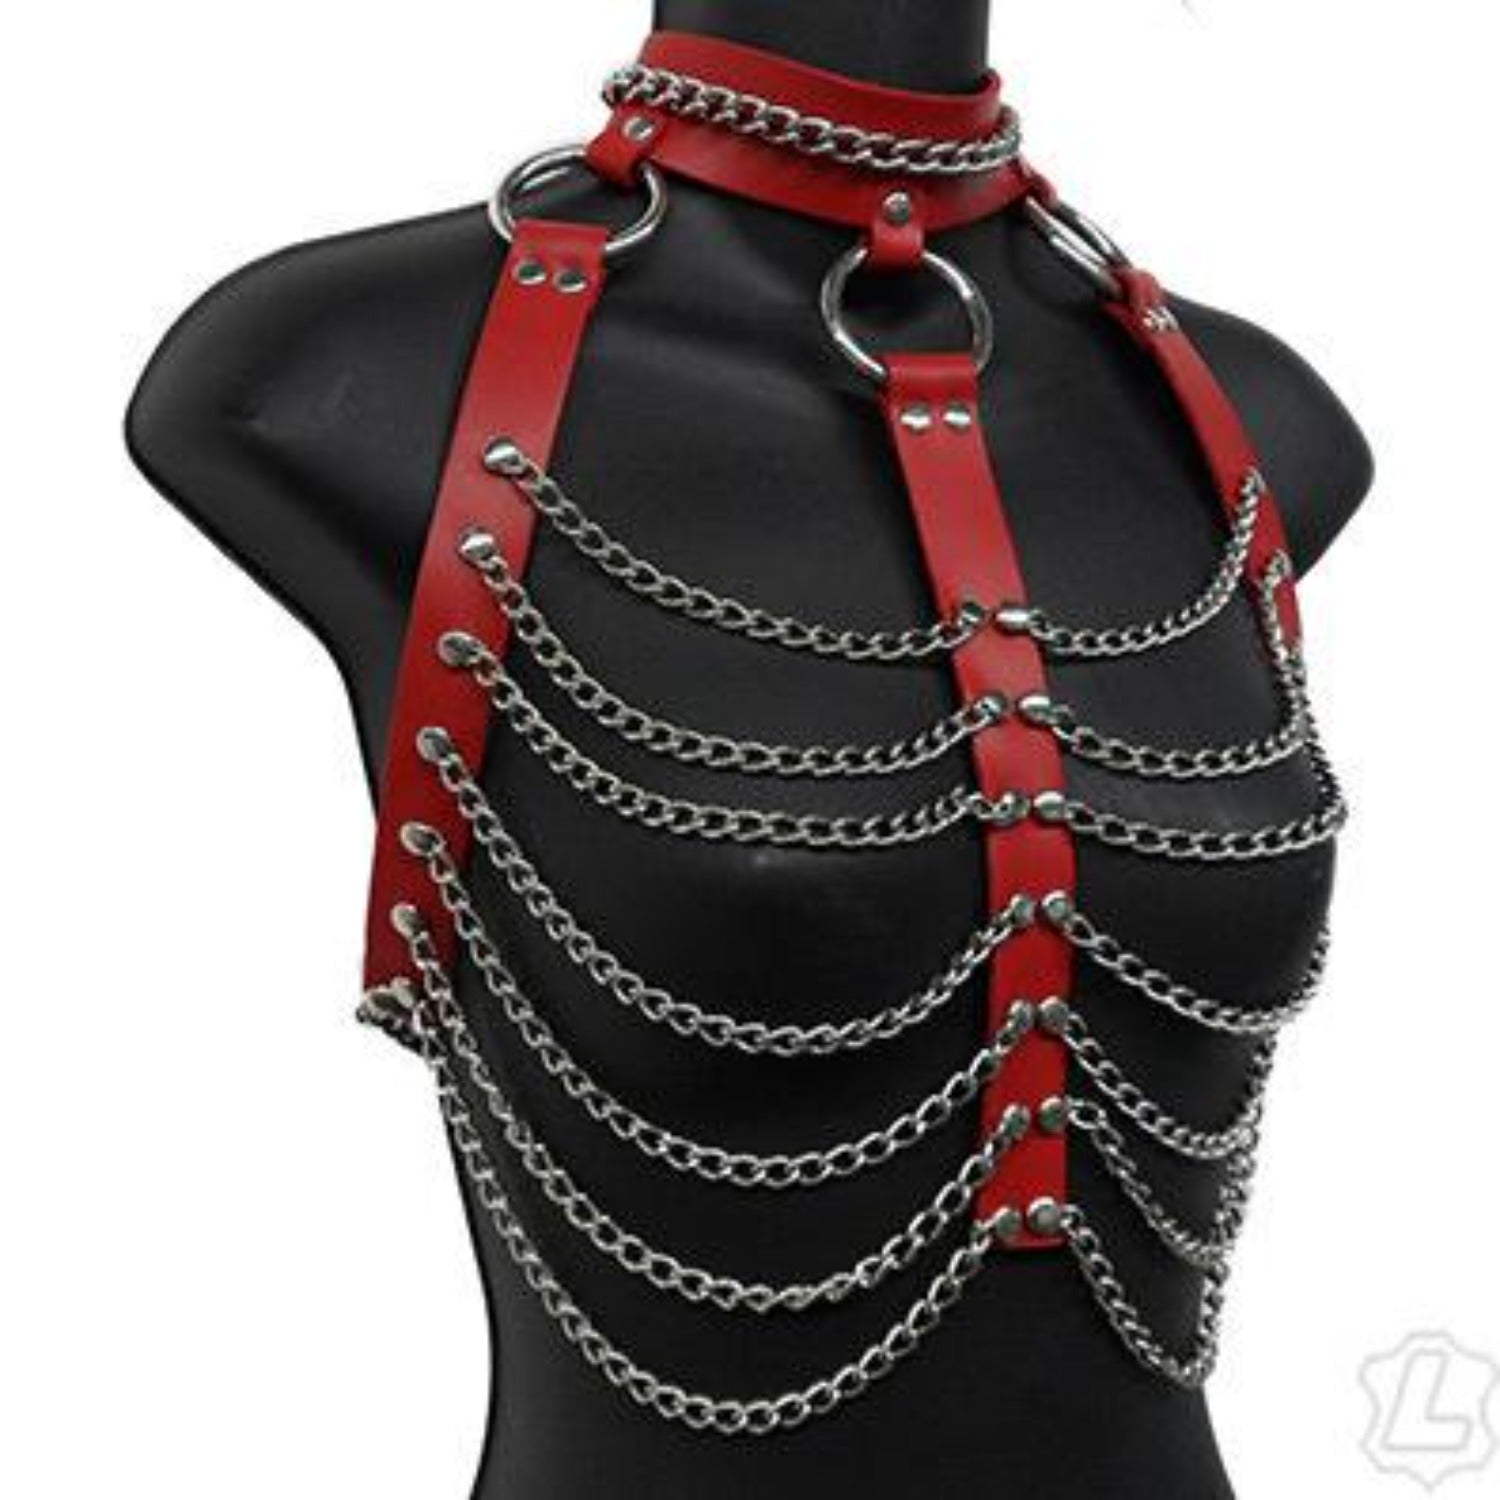 The red leather and chain three column halter harness on a mannequin.